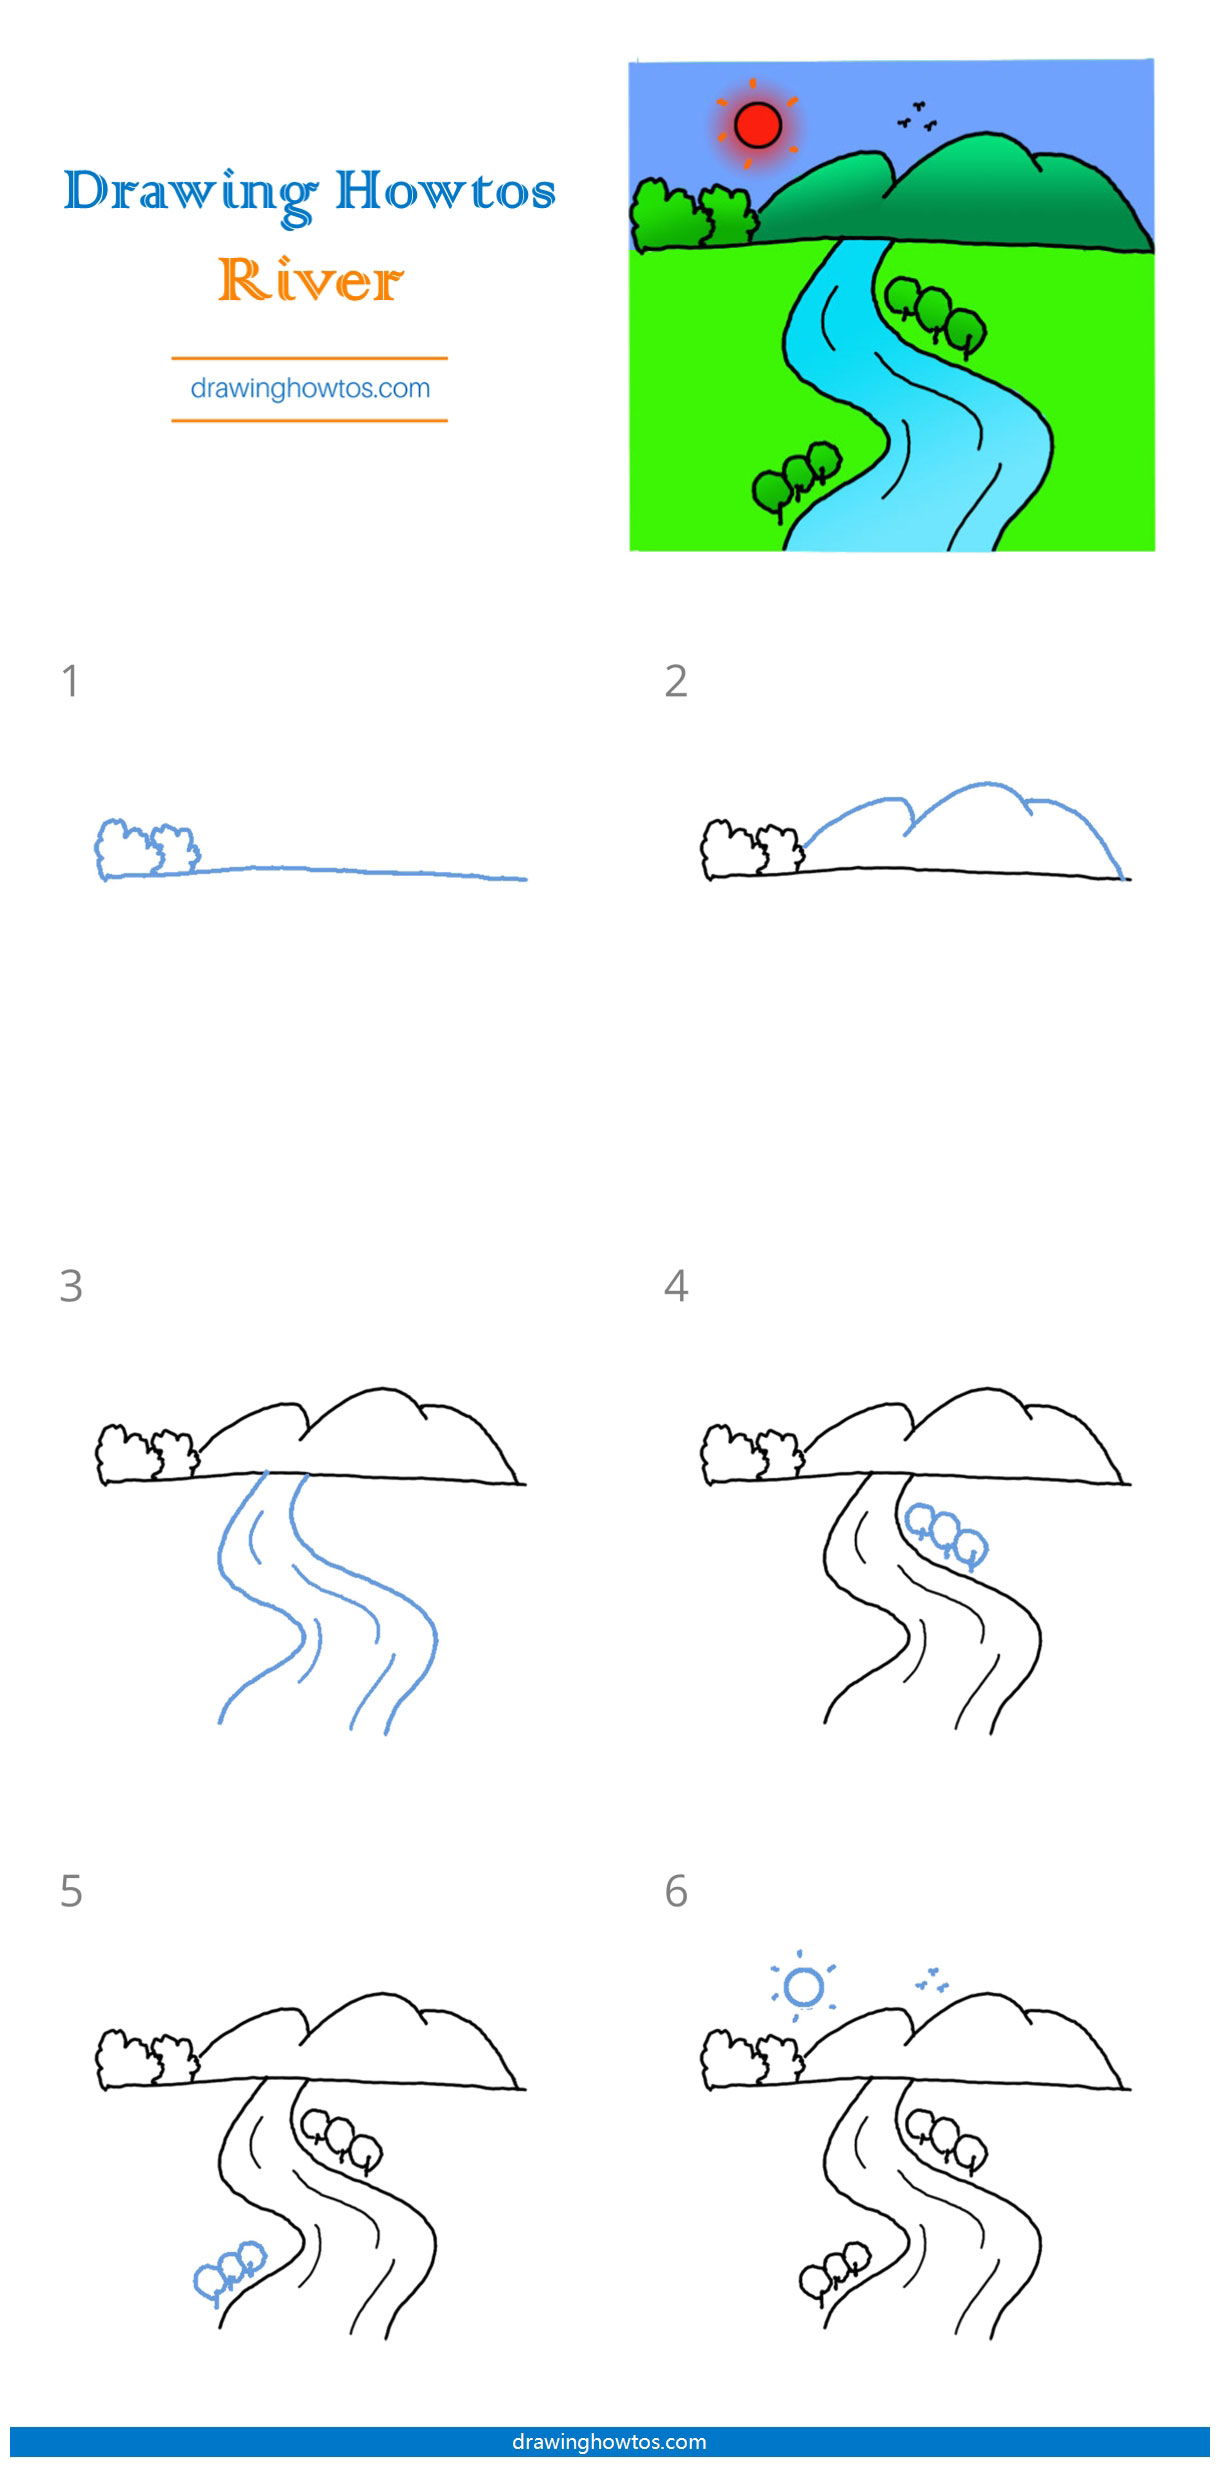 How to Draw a River Step by Step